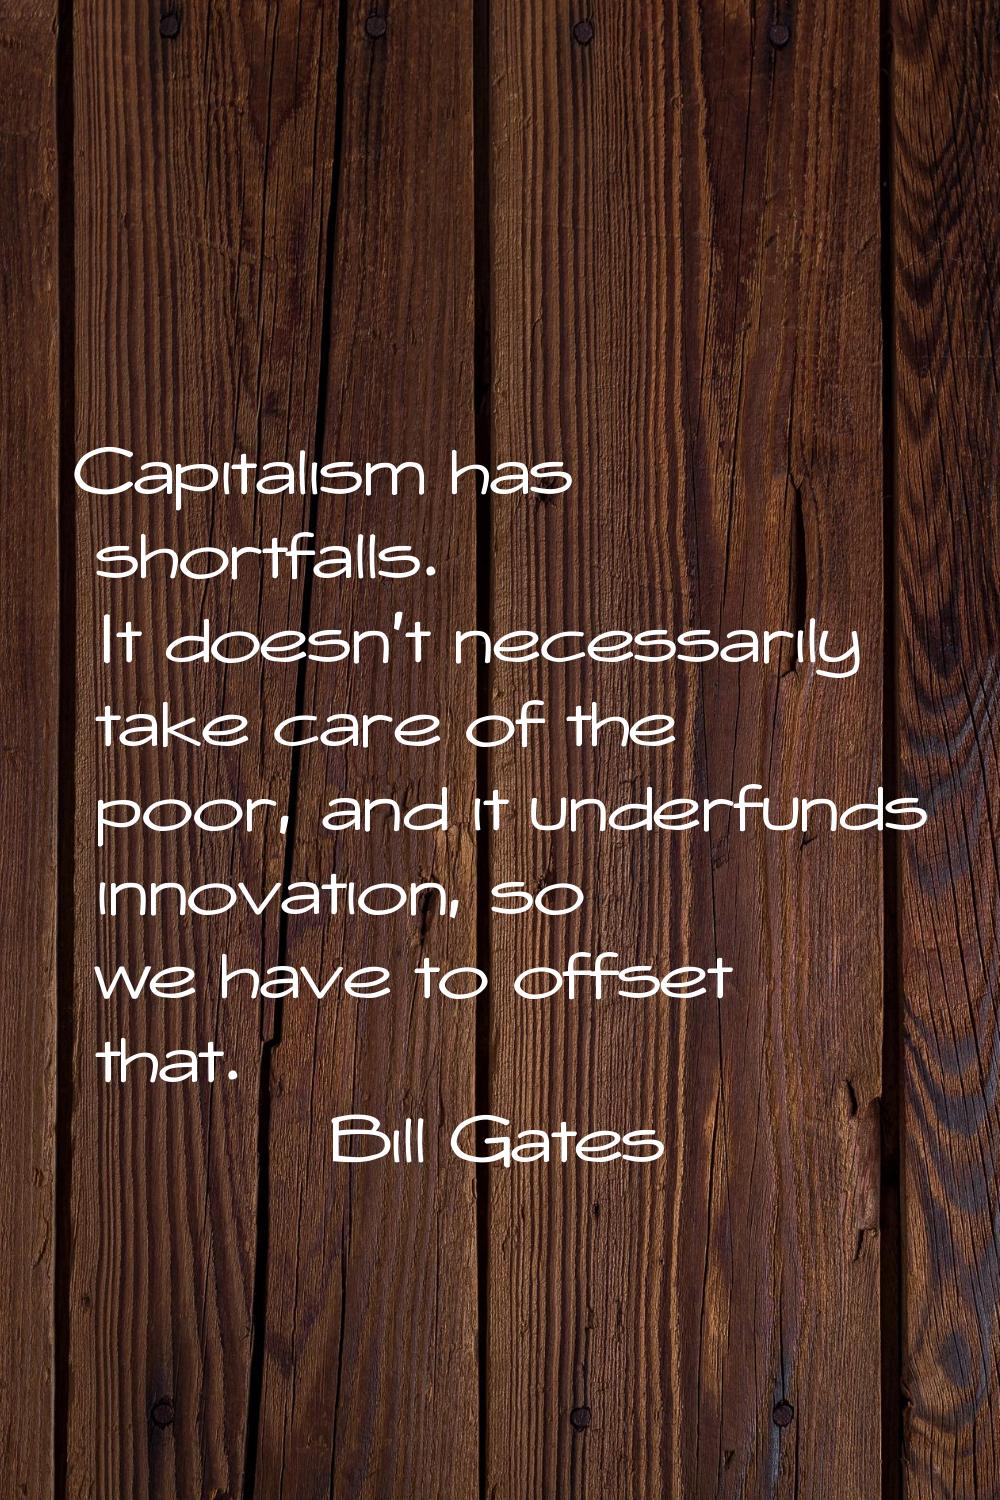 Capitalism has shortfalls. It doesn't necessarily take care of the poor, and it underfunds innovati